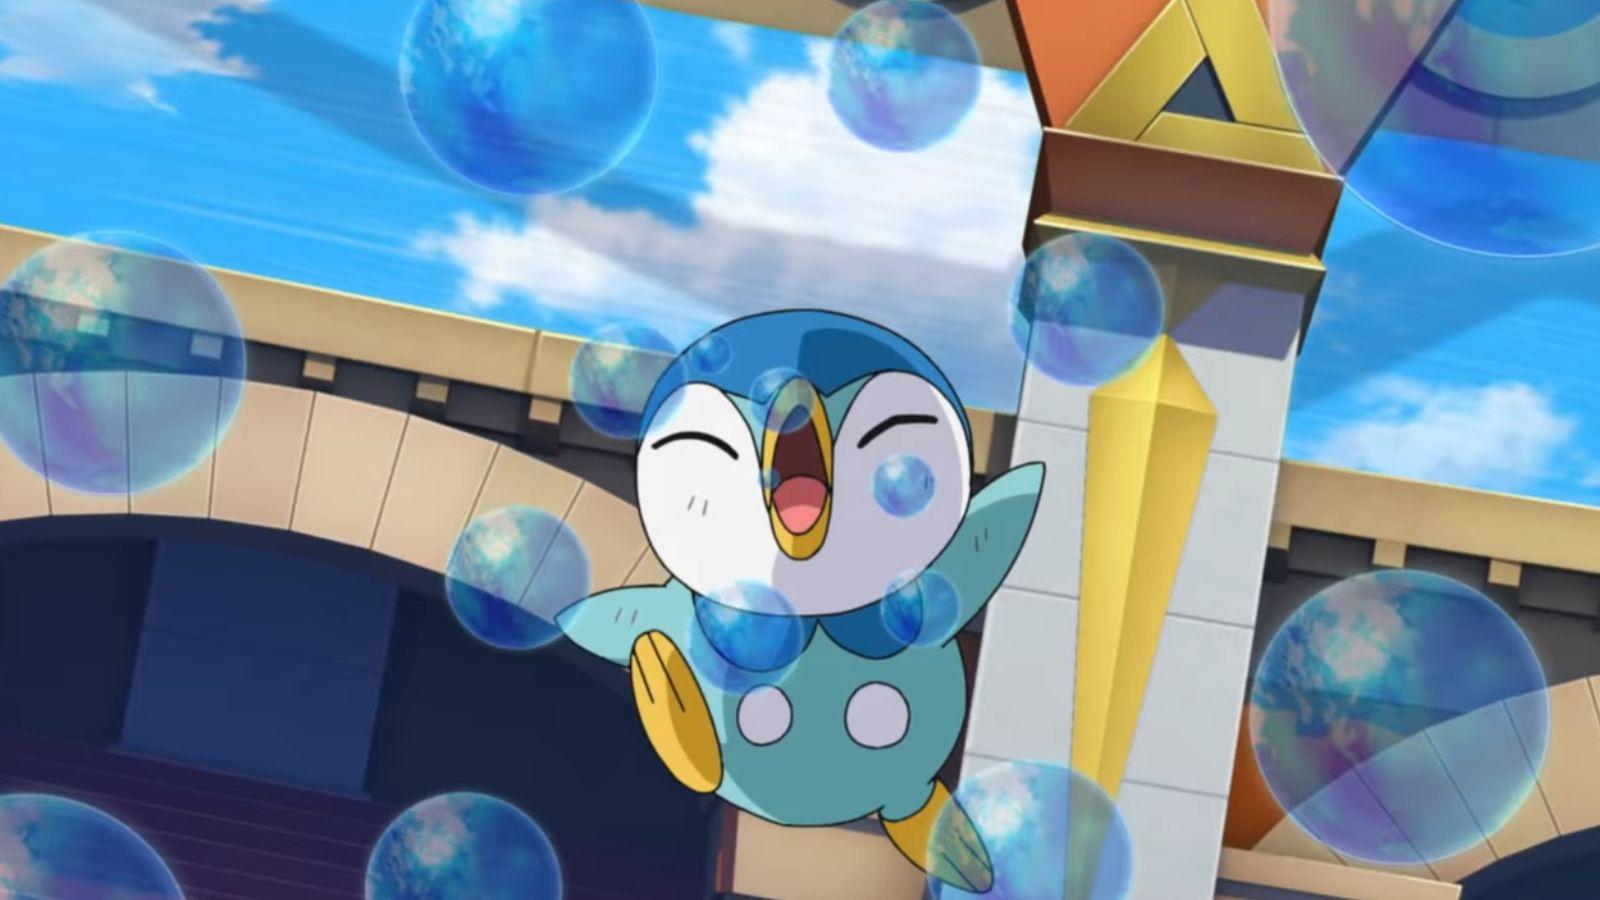 Piplup Bubble Beam from Pokemon anime.